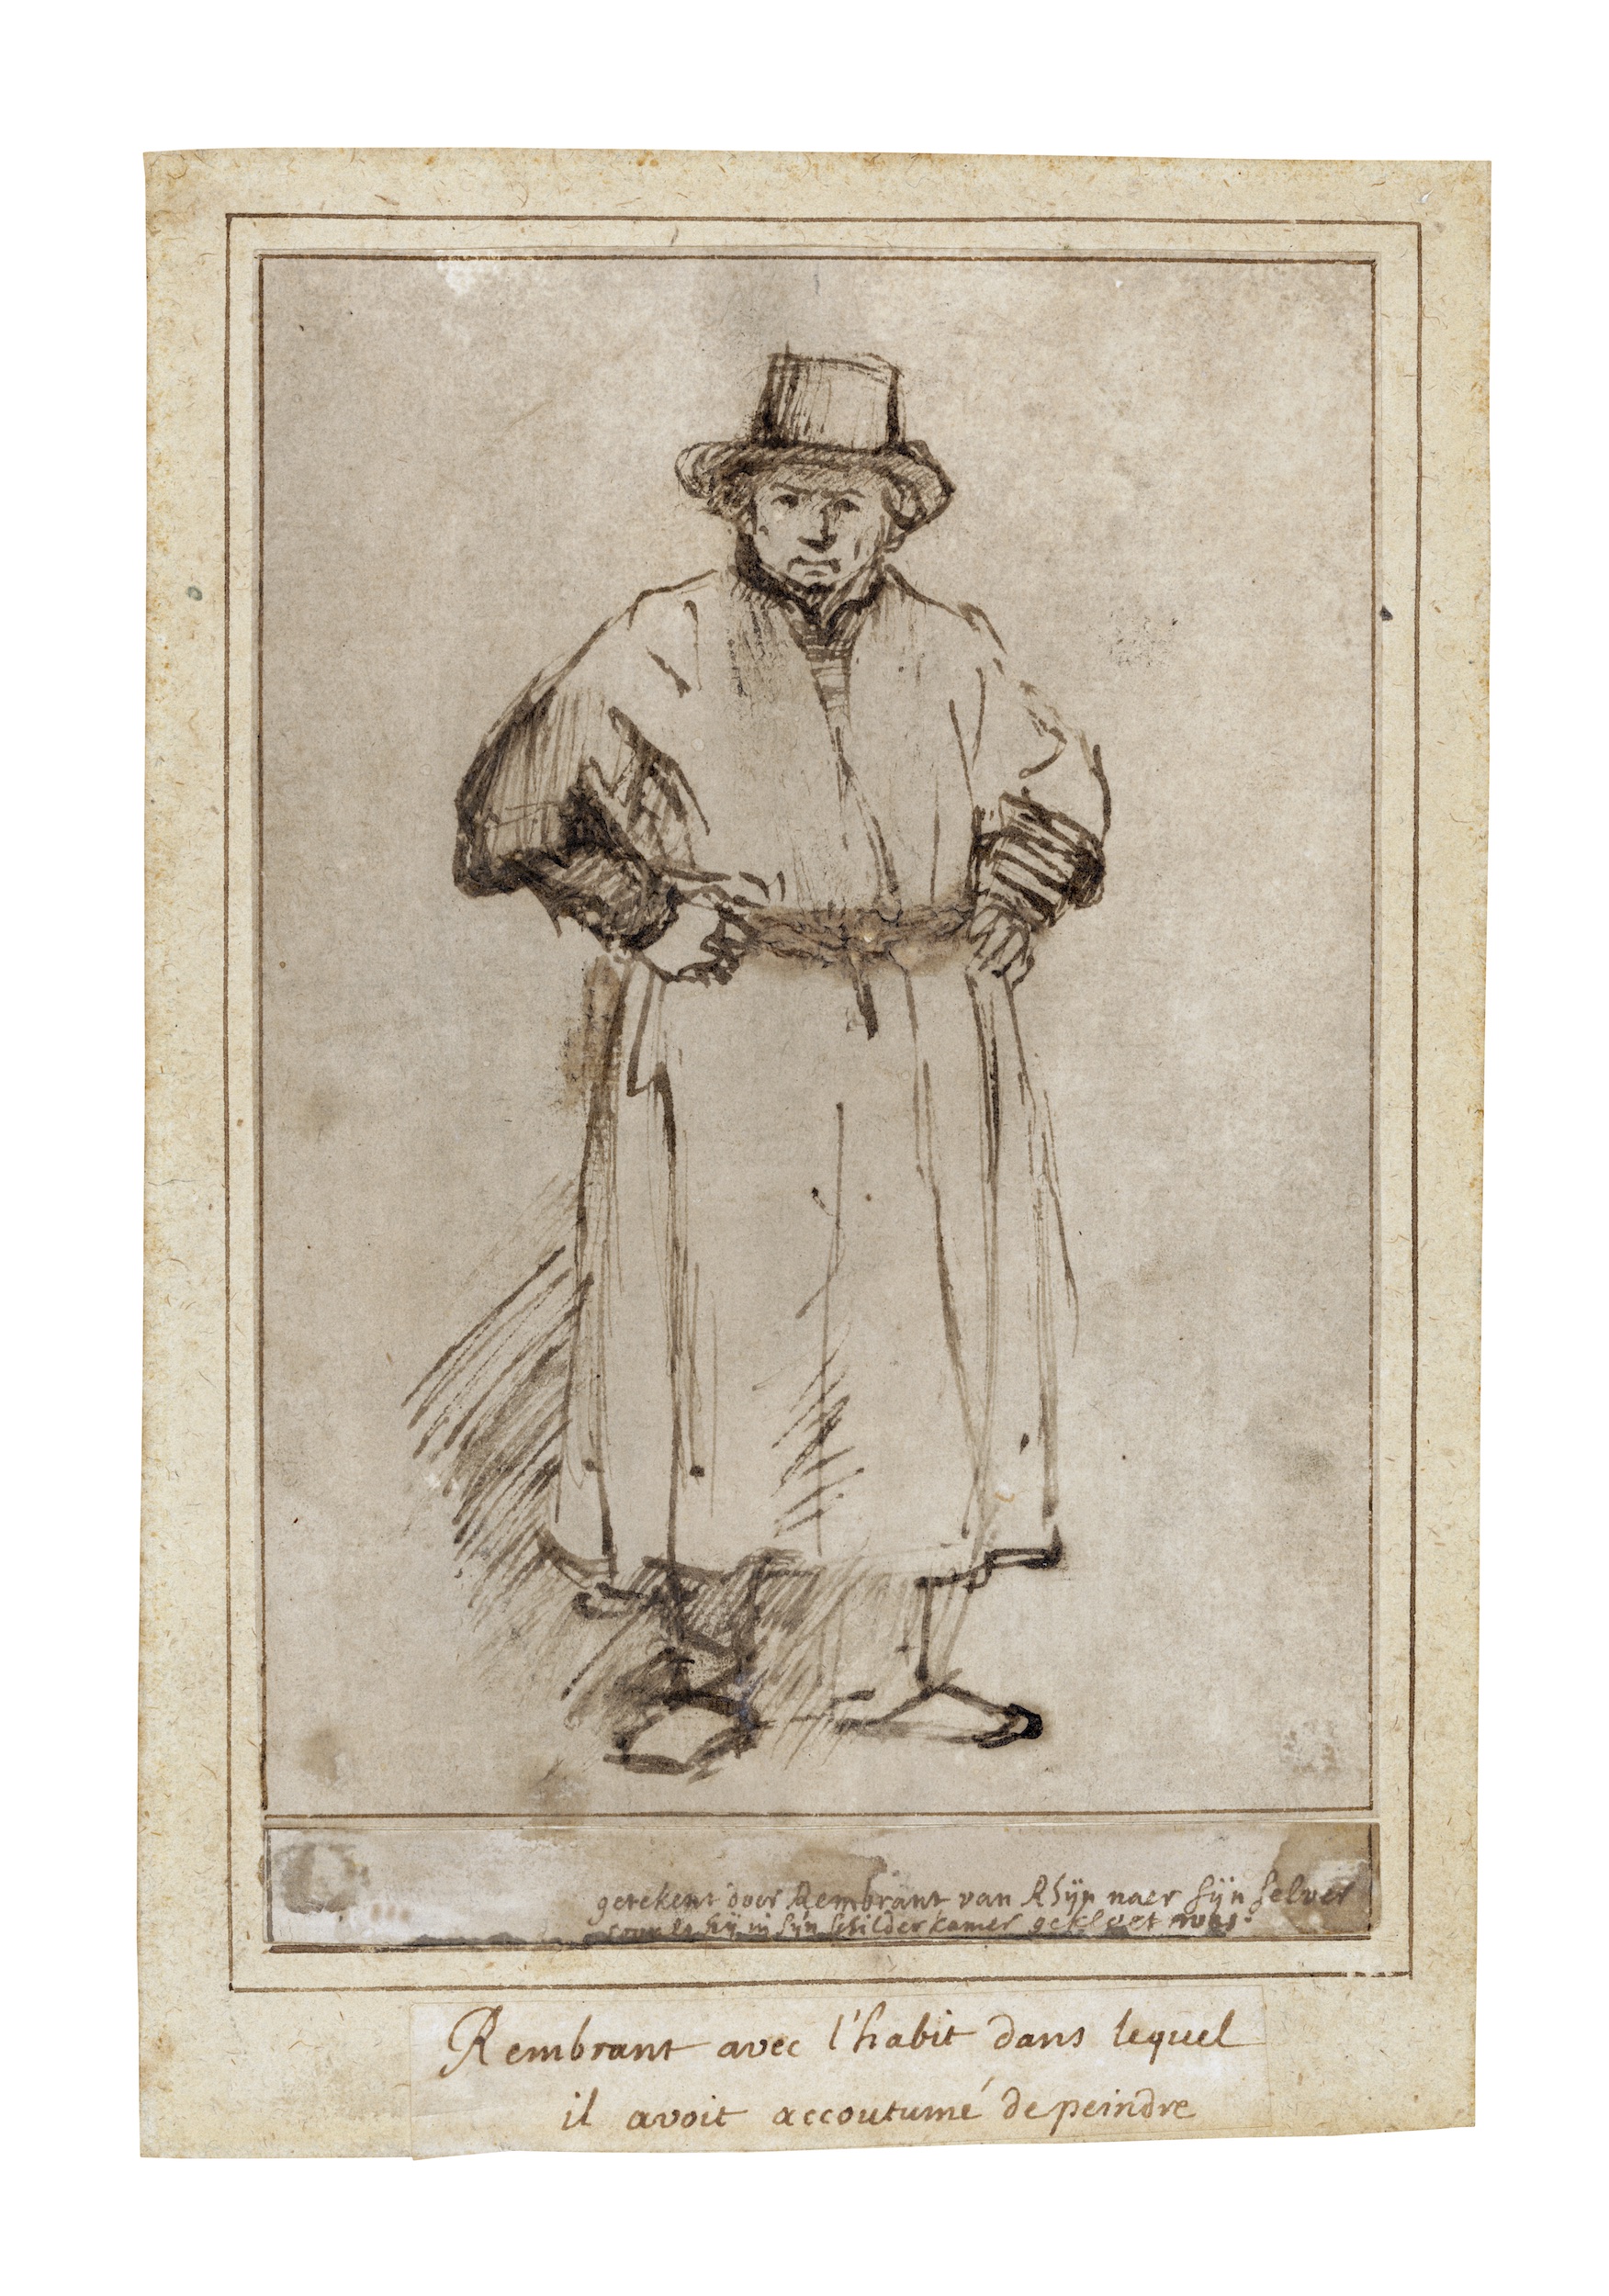 Rembrandt by Willem Drost - c. 1650 - 203 x 134 mm Rembrandthuis